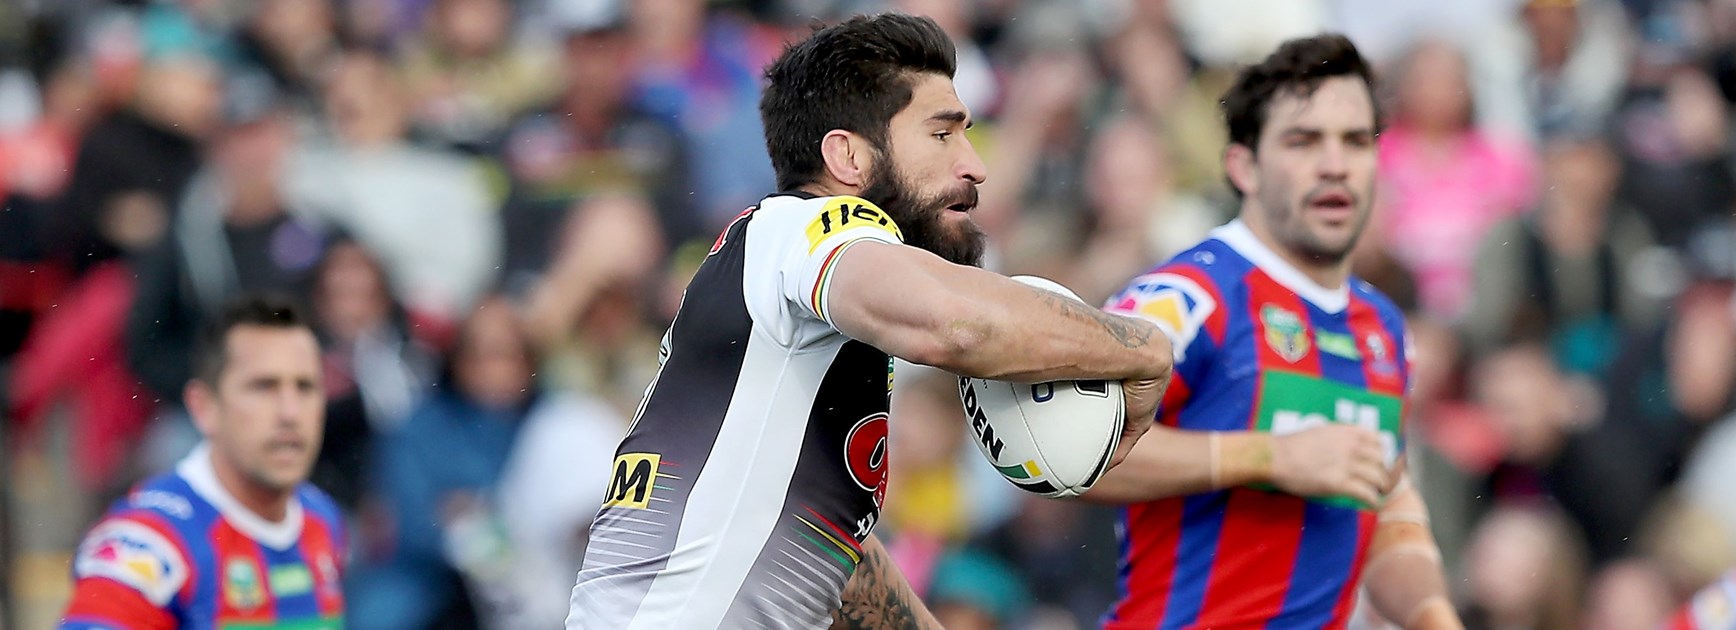 Tamou: Panthers deserve to have selection axe looming